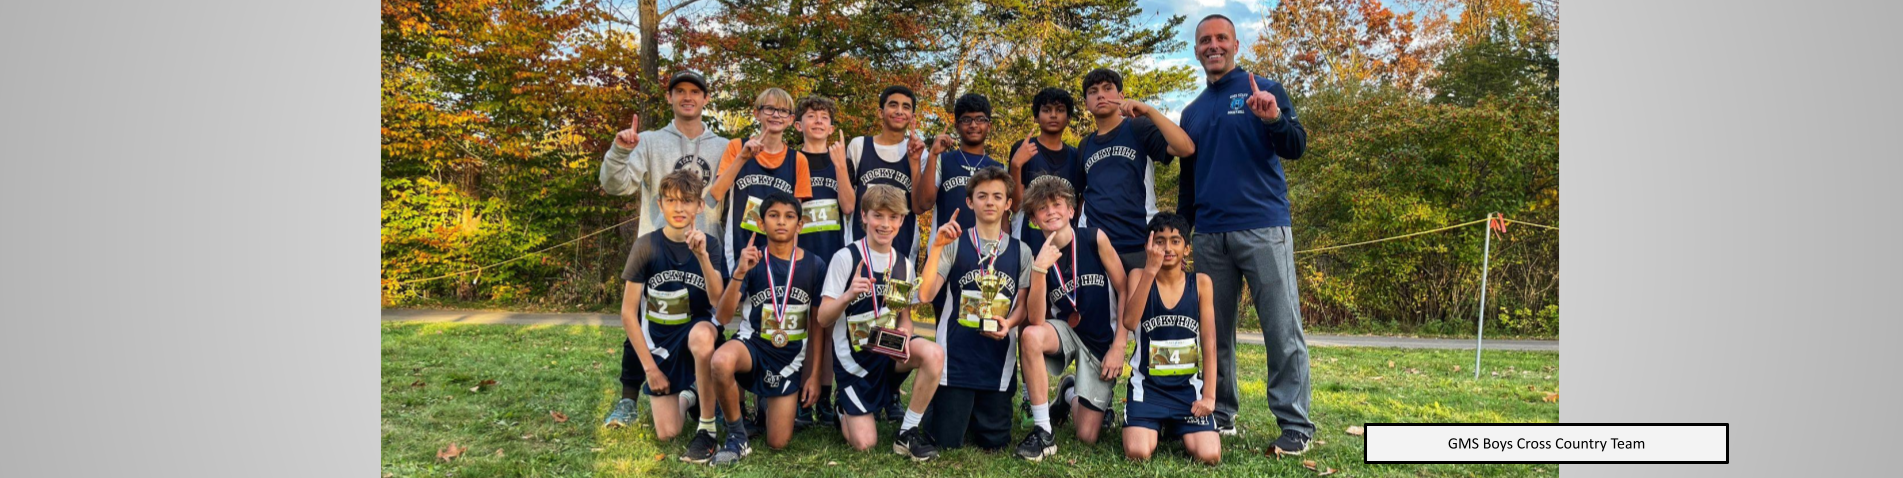 Boys Cross Country win the league championship